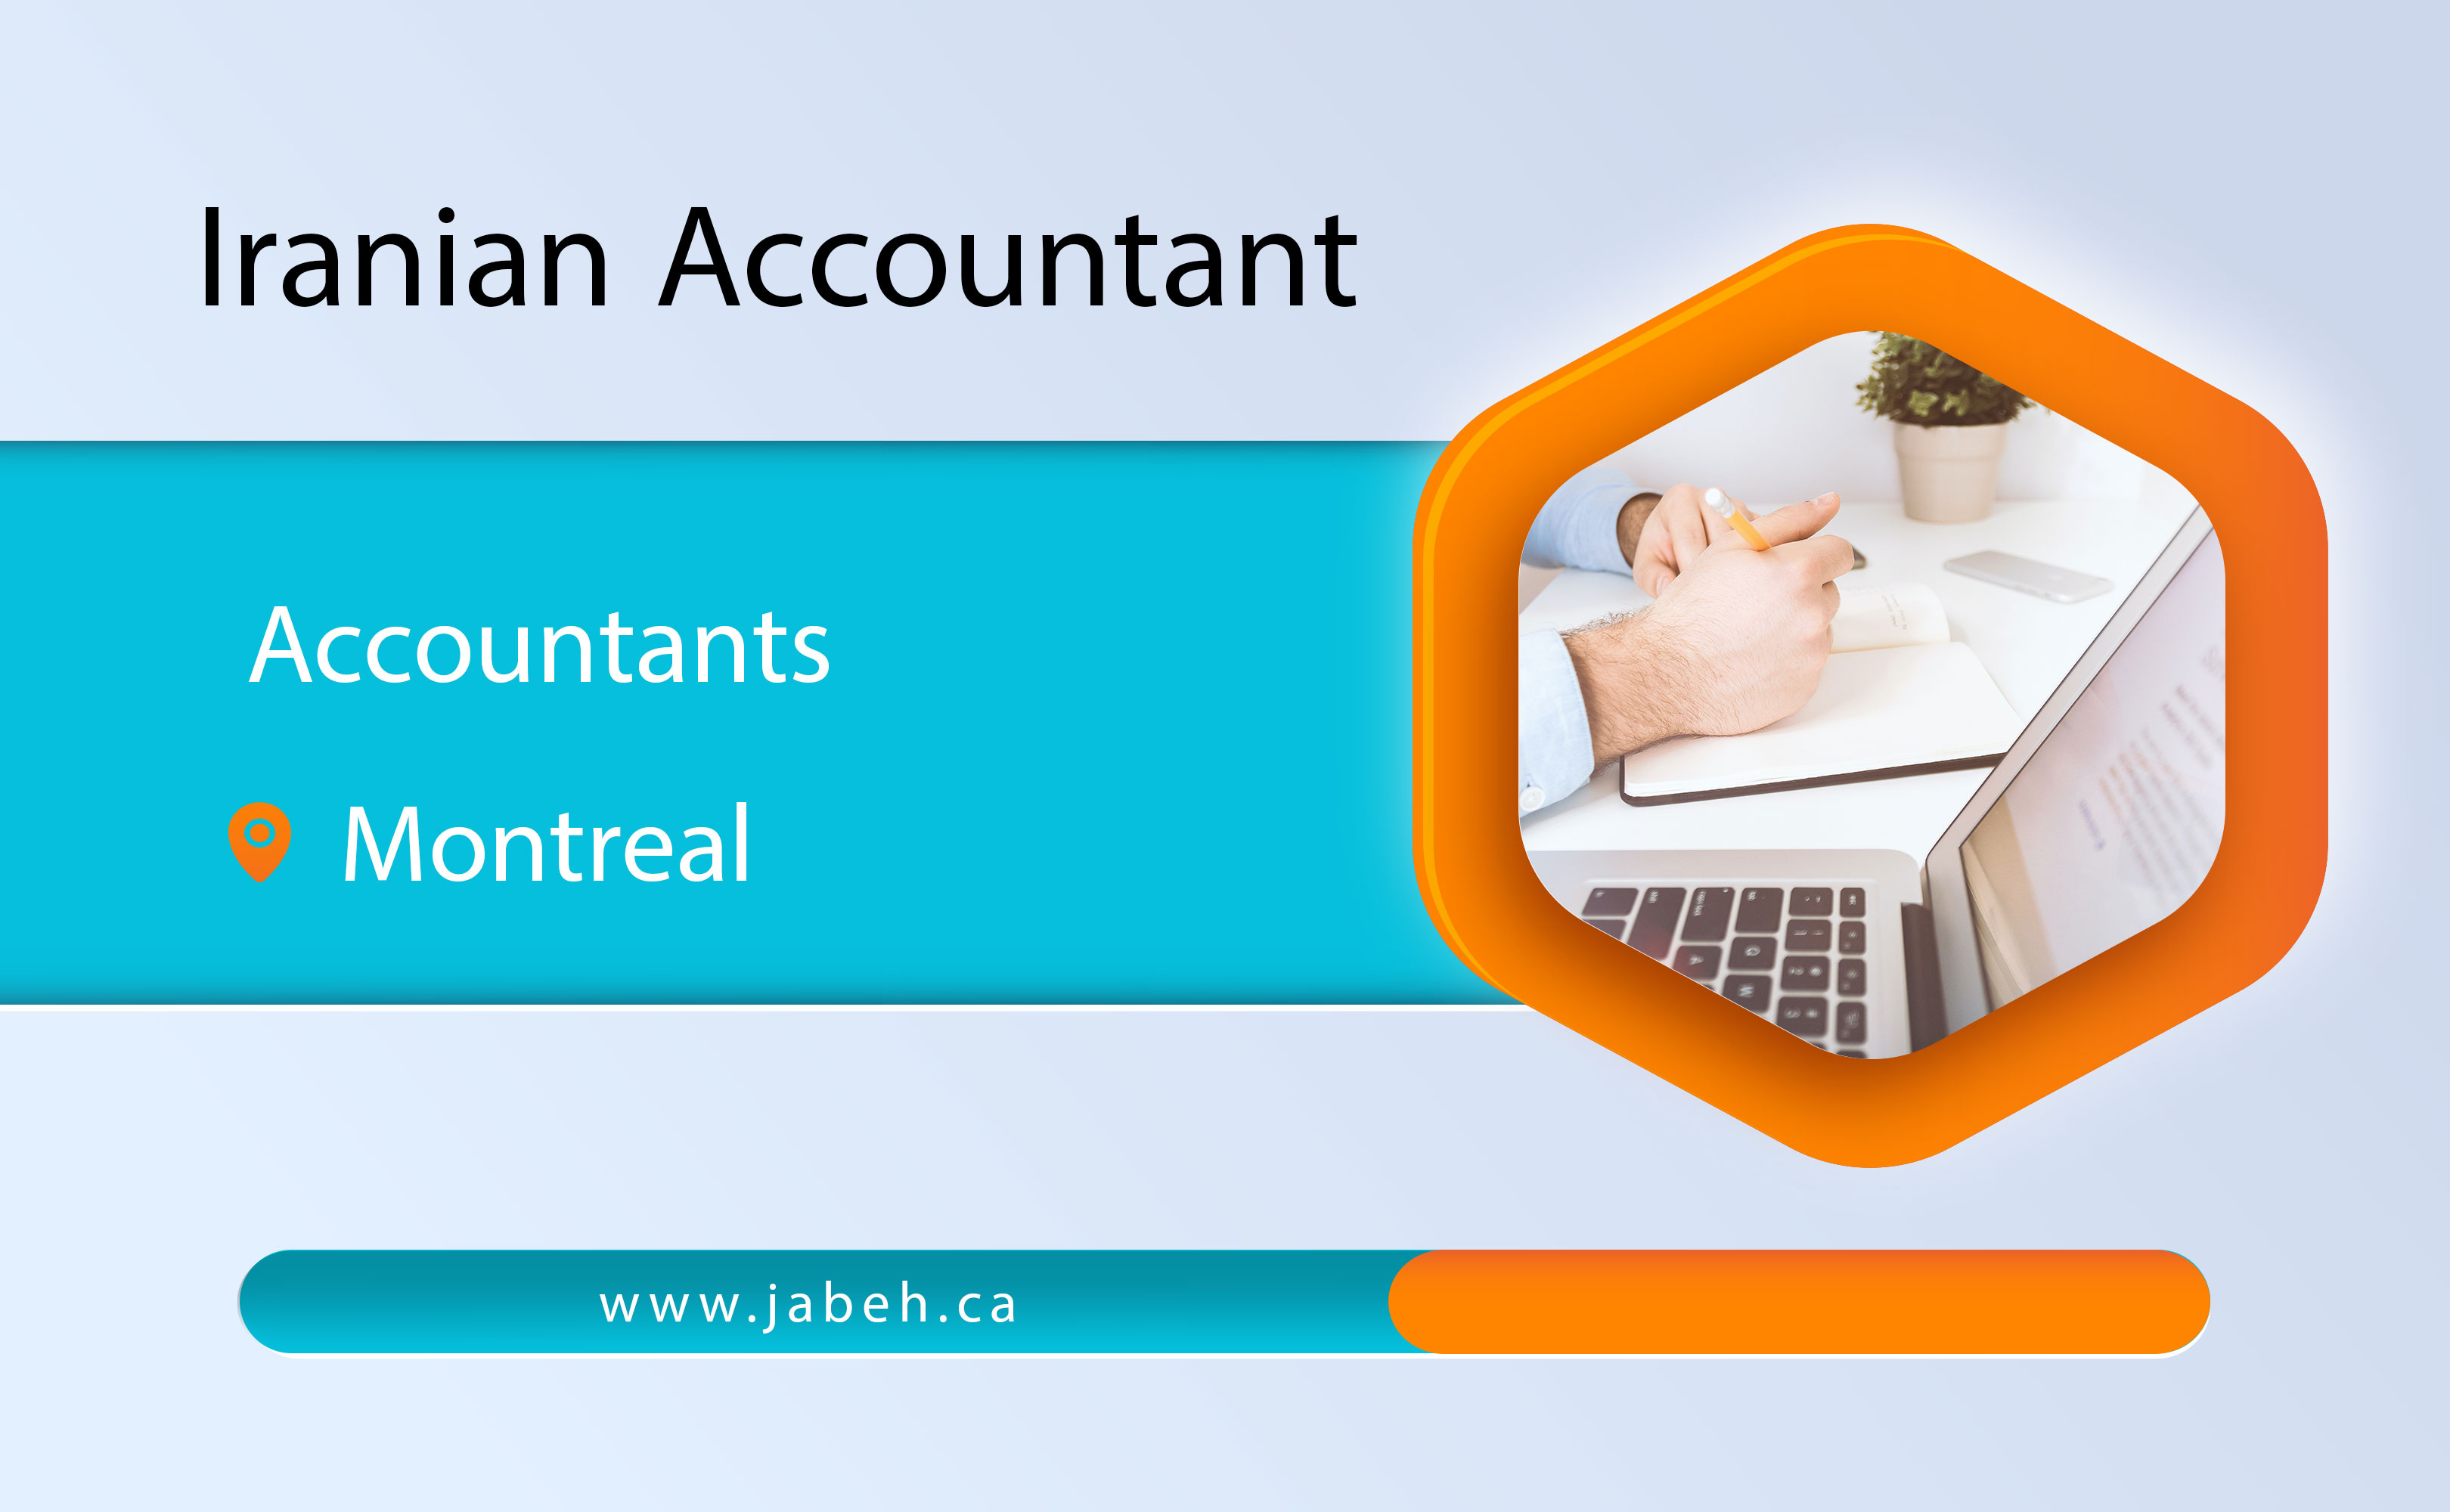 Iranian accounting accountants in Montreal